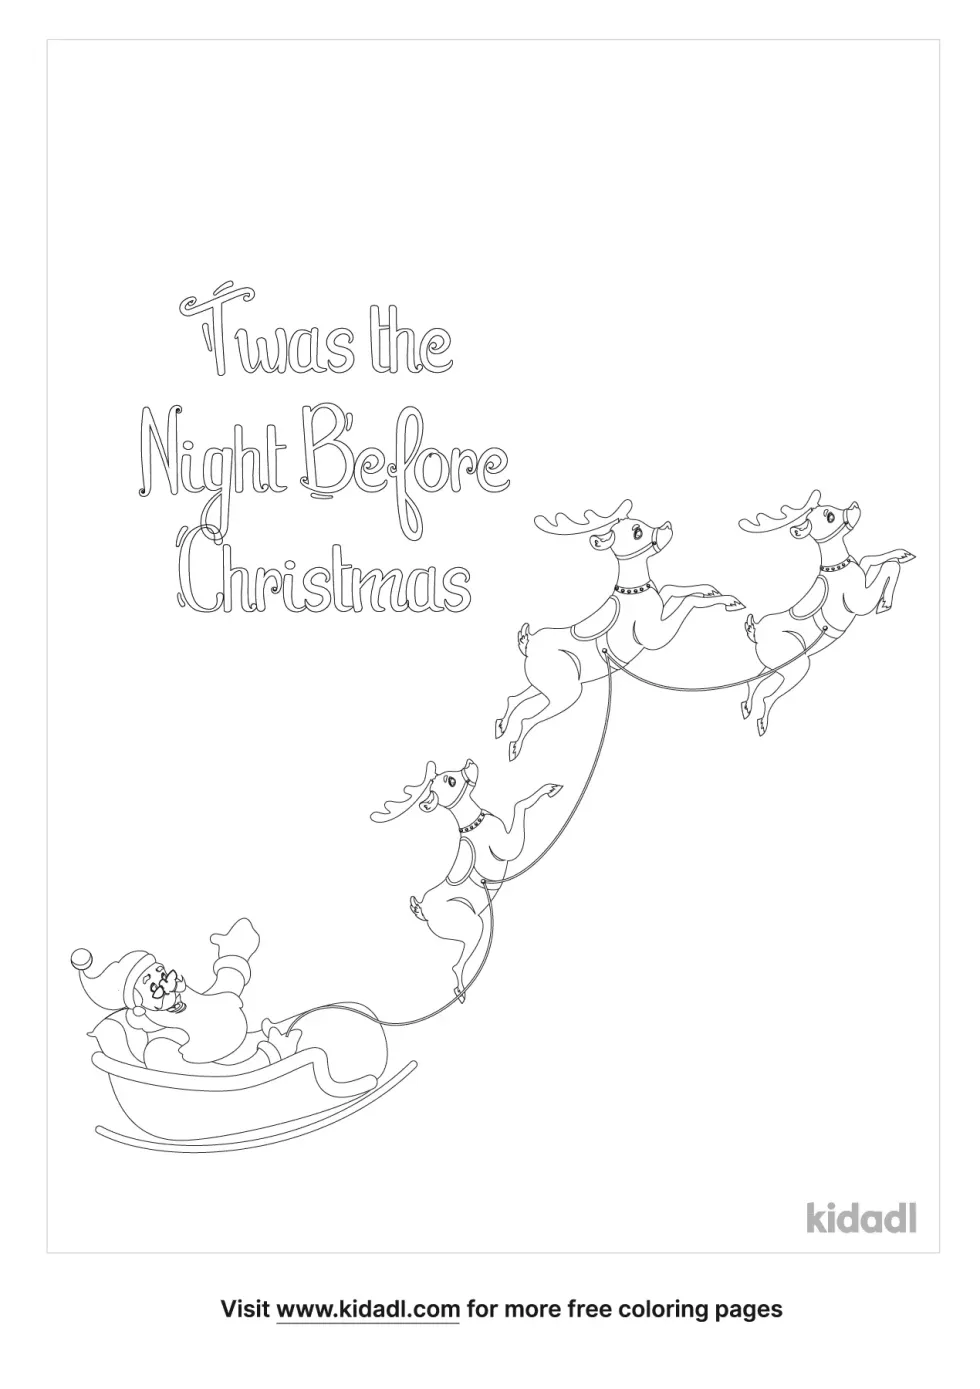 Twas The Night Before Christmas Coloring Page